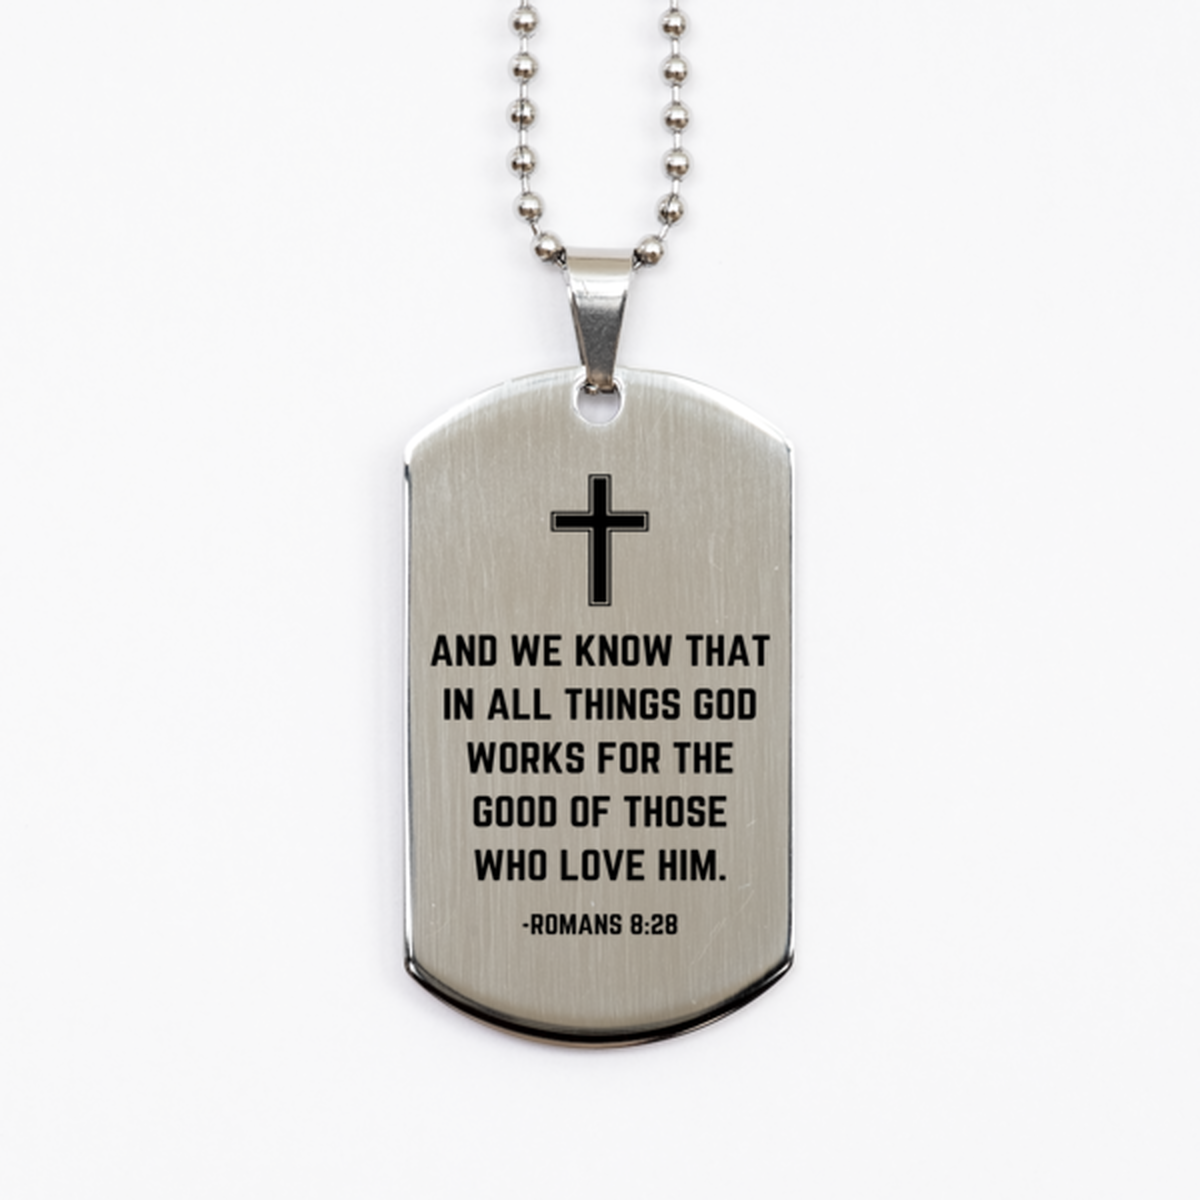 Baptism Gifts For Teenage Boys Girls, Christian Bible Verse Silver Dog Tag, And we know that in all things, Confirmation Gifts, Bible Verse Necklace for Son, Godson, Grandson, Nephew